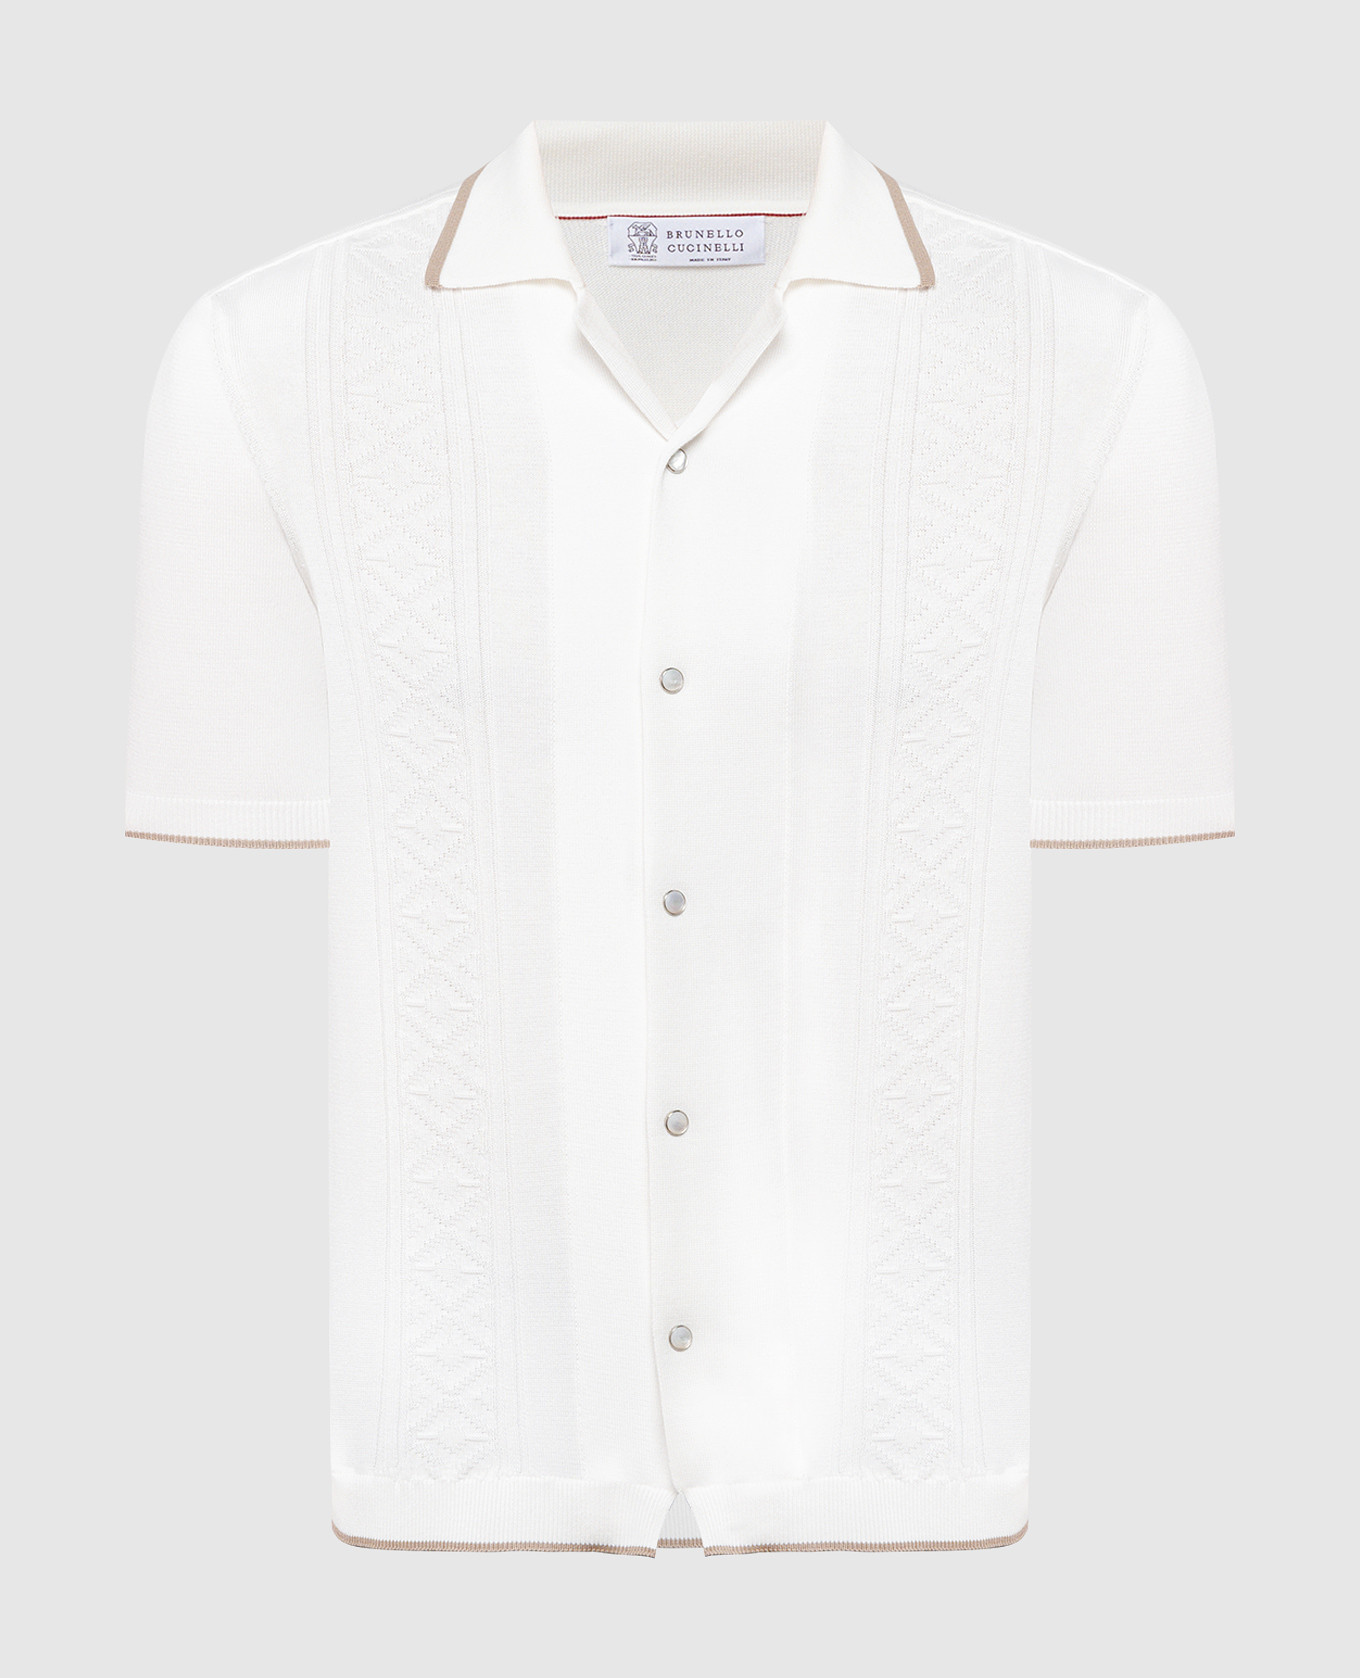 White shirt in a textured pattern